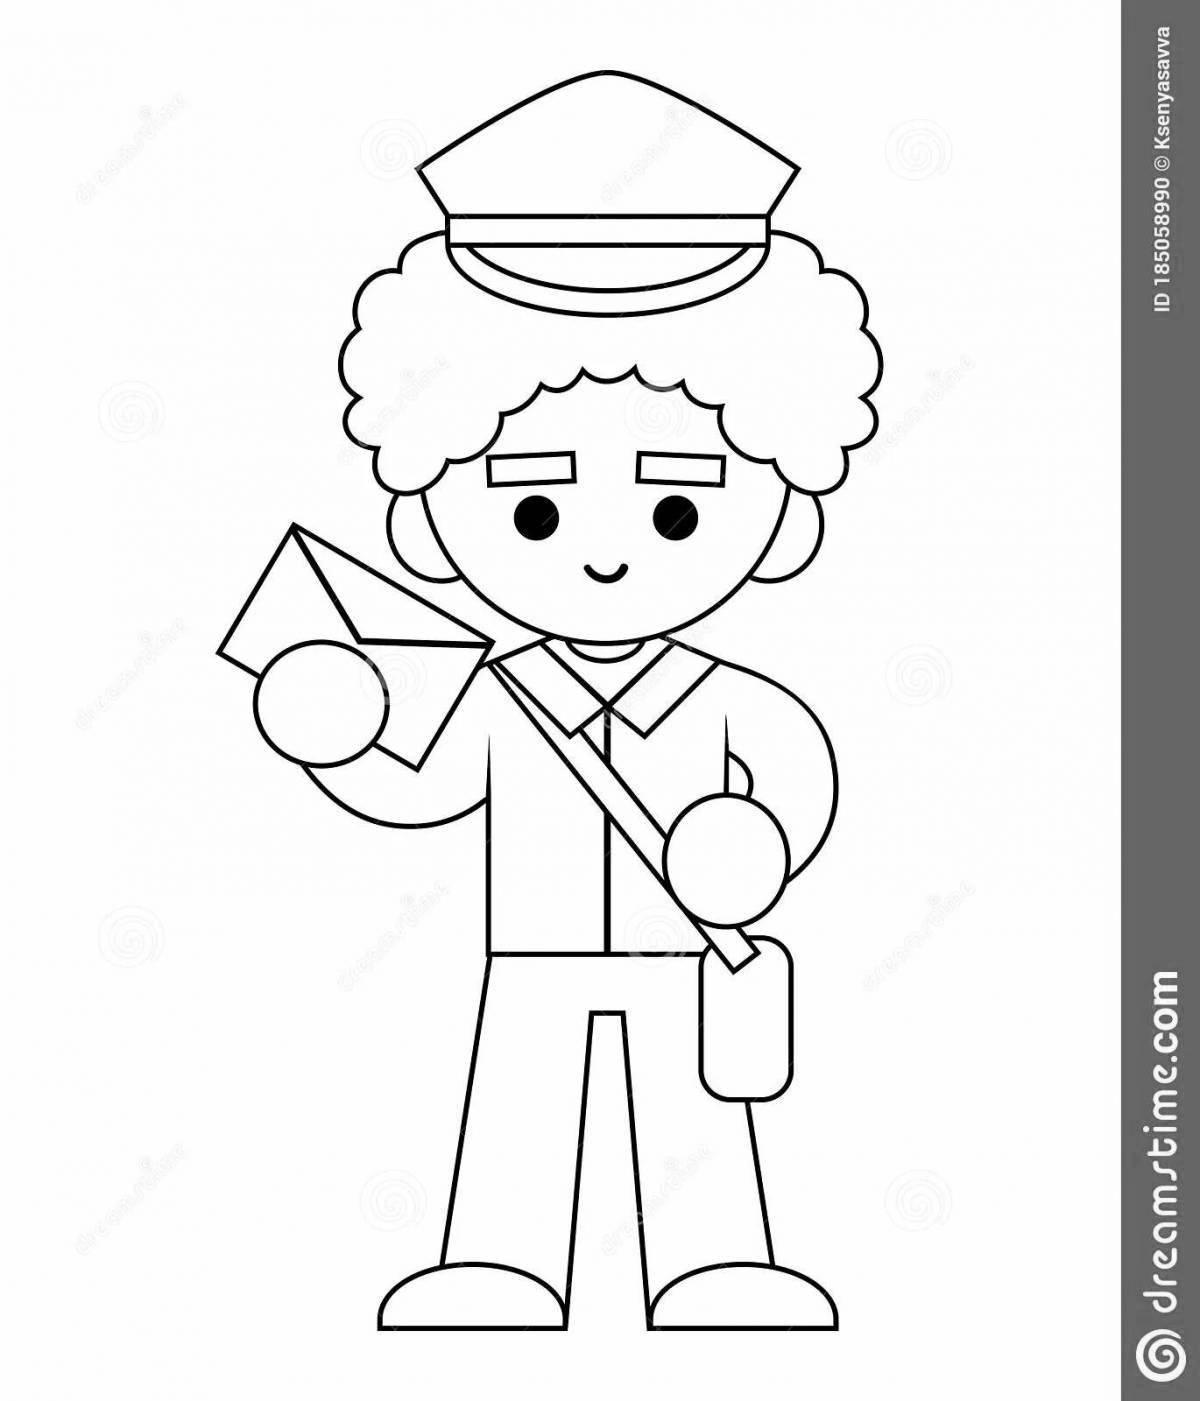 Crazy postman coloring page for preschoolers